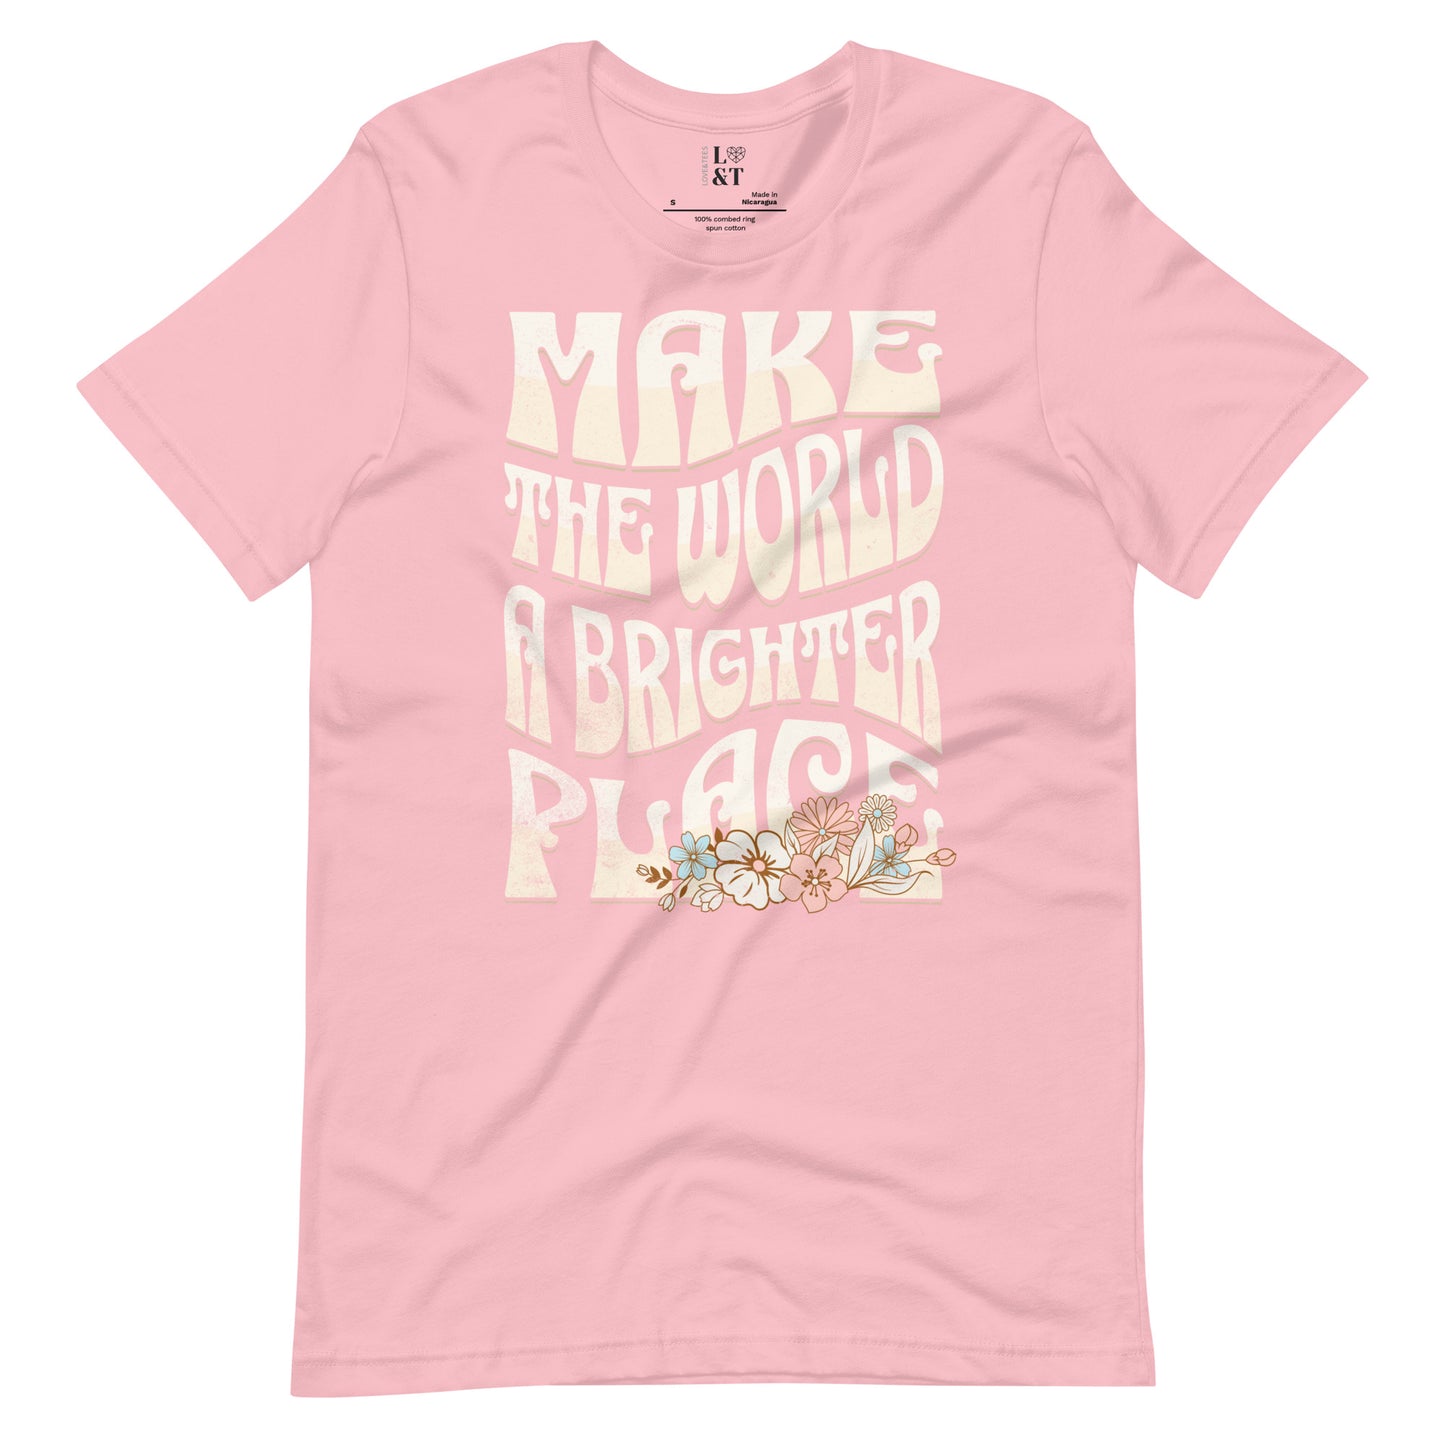 Make The World A Brighter Place Unisex T-Shirt